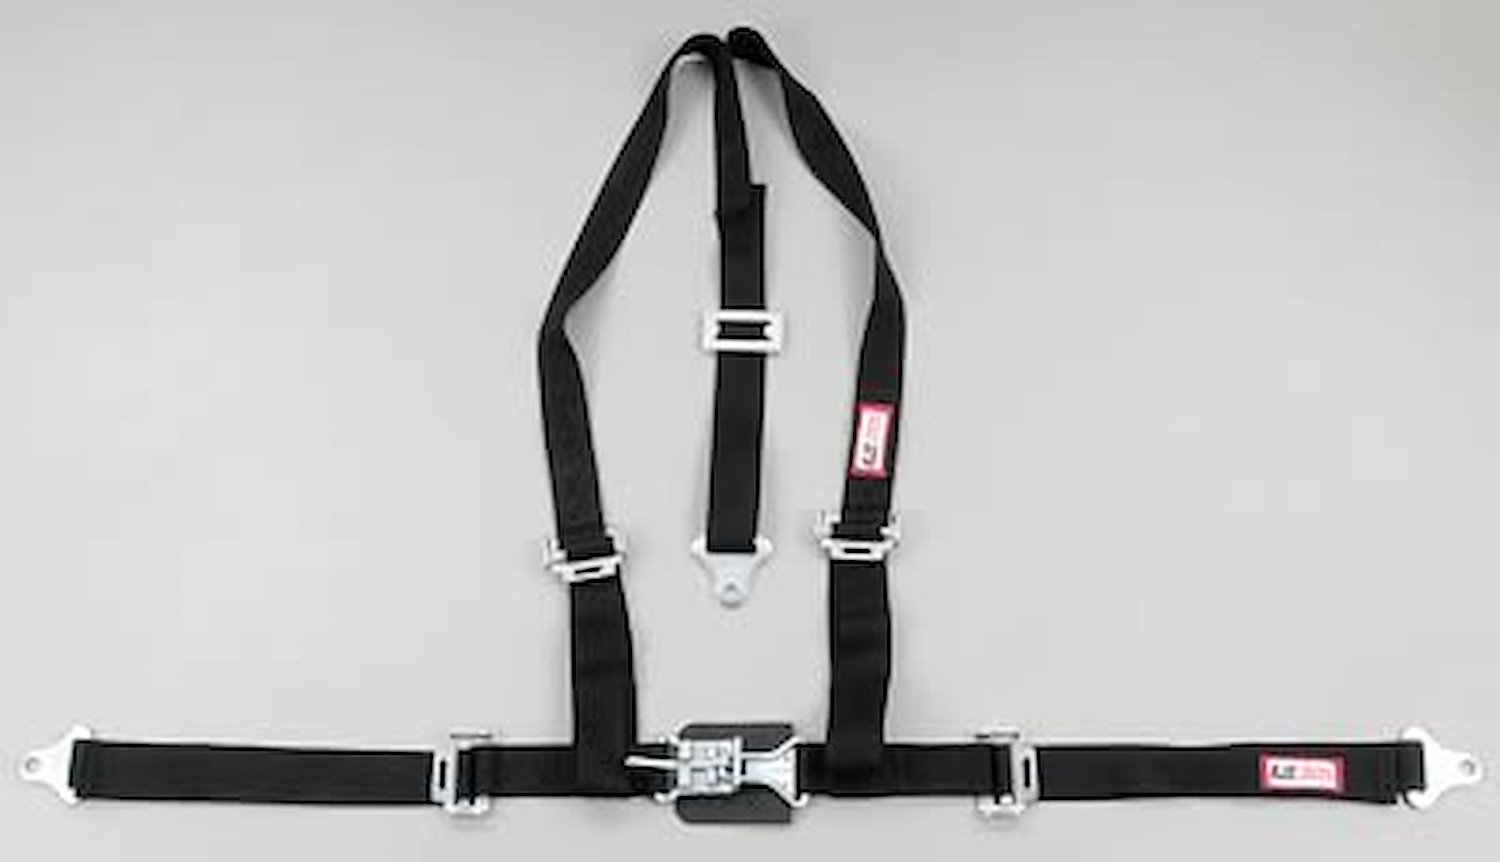 NON-SFI L&L HARNESS 2 PULL UP Lap Belt SNAP SEWN IN 2 S.H. Y FLOOR Mount w/STERNUM STRAP WRAP/SNAP GRAY